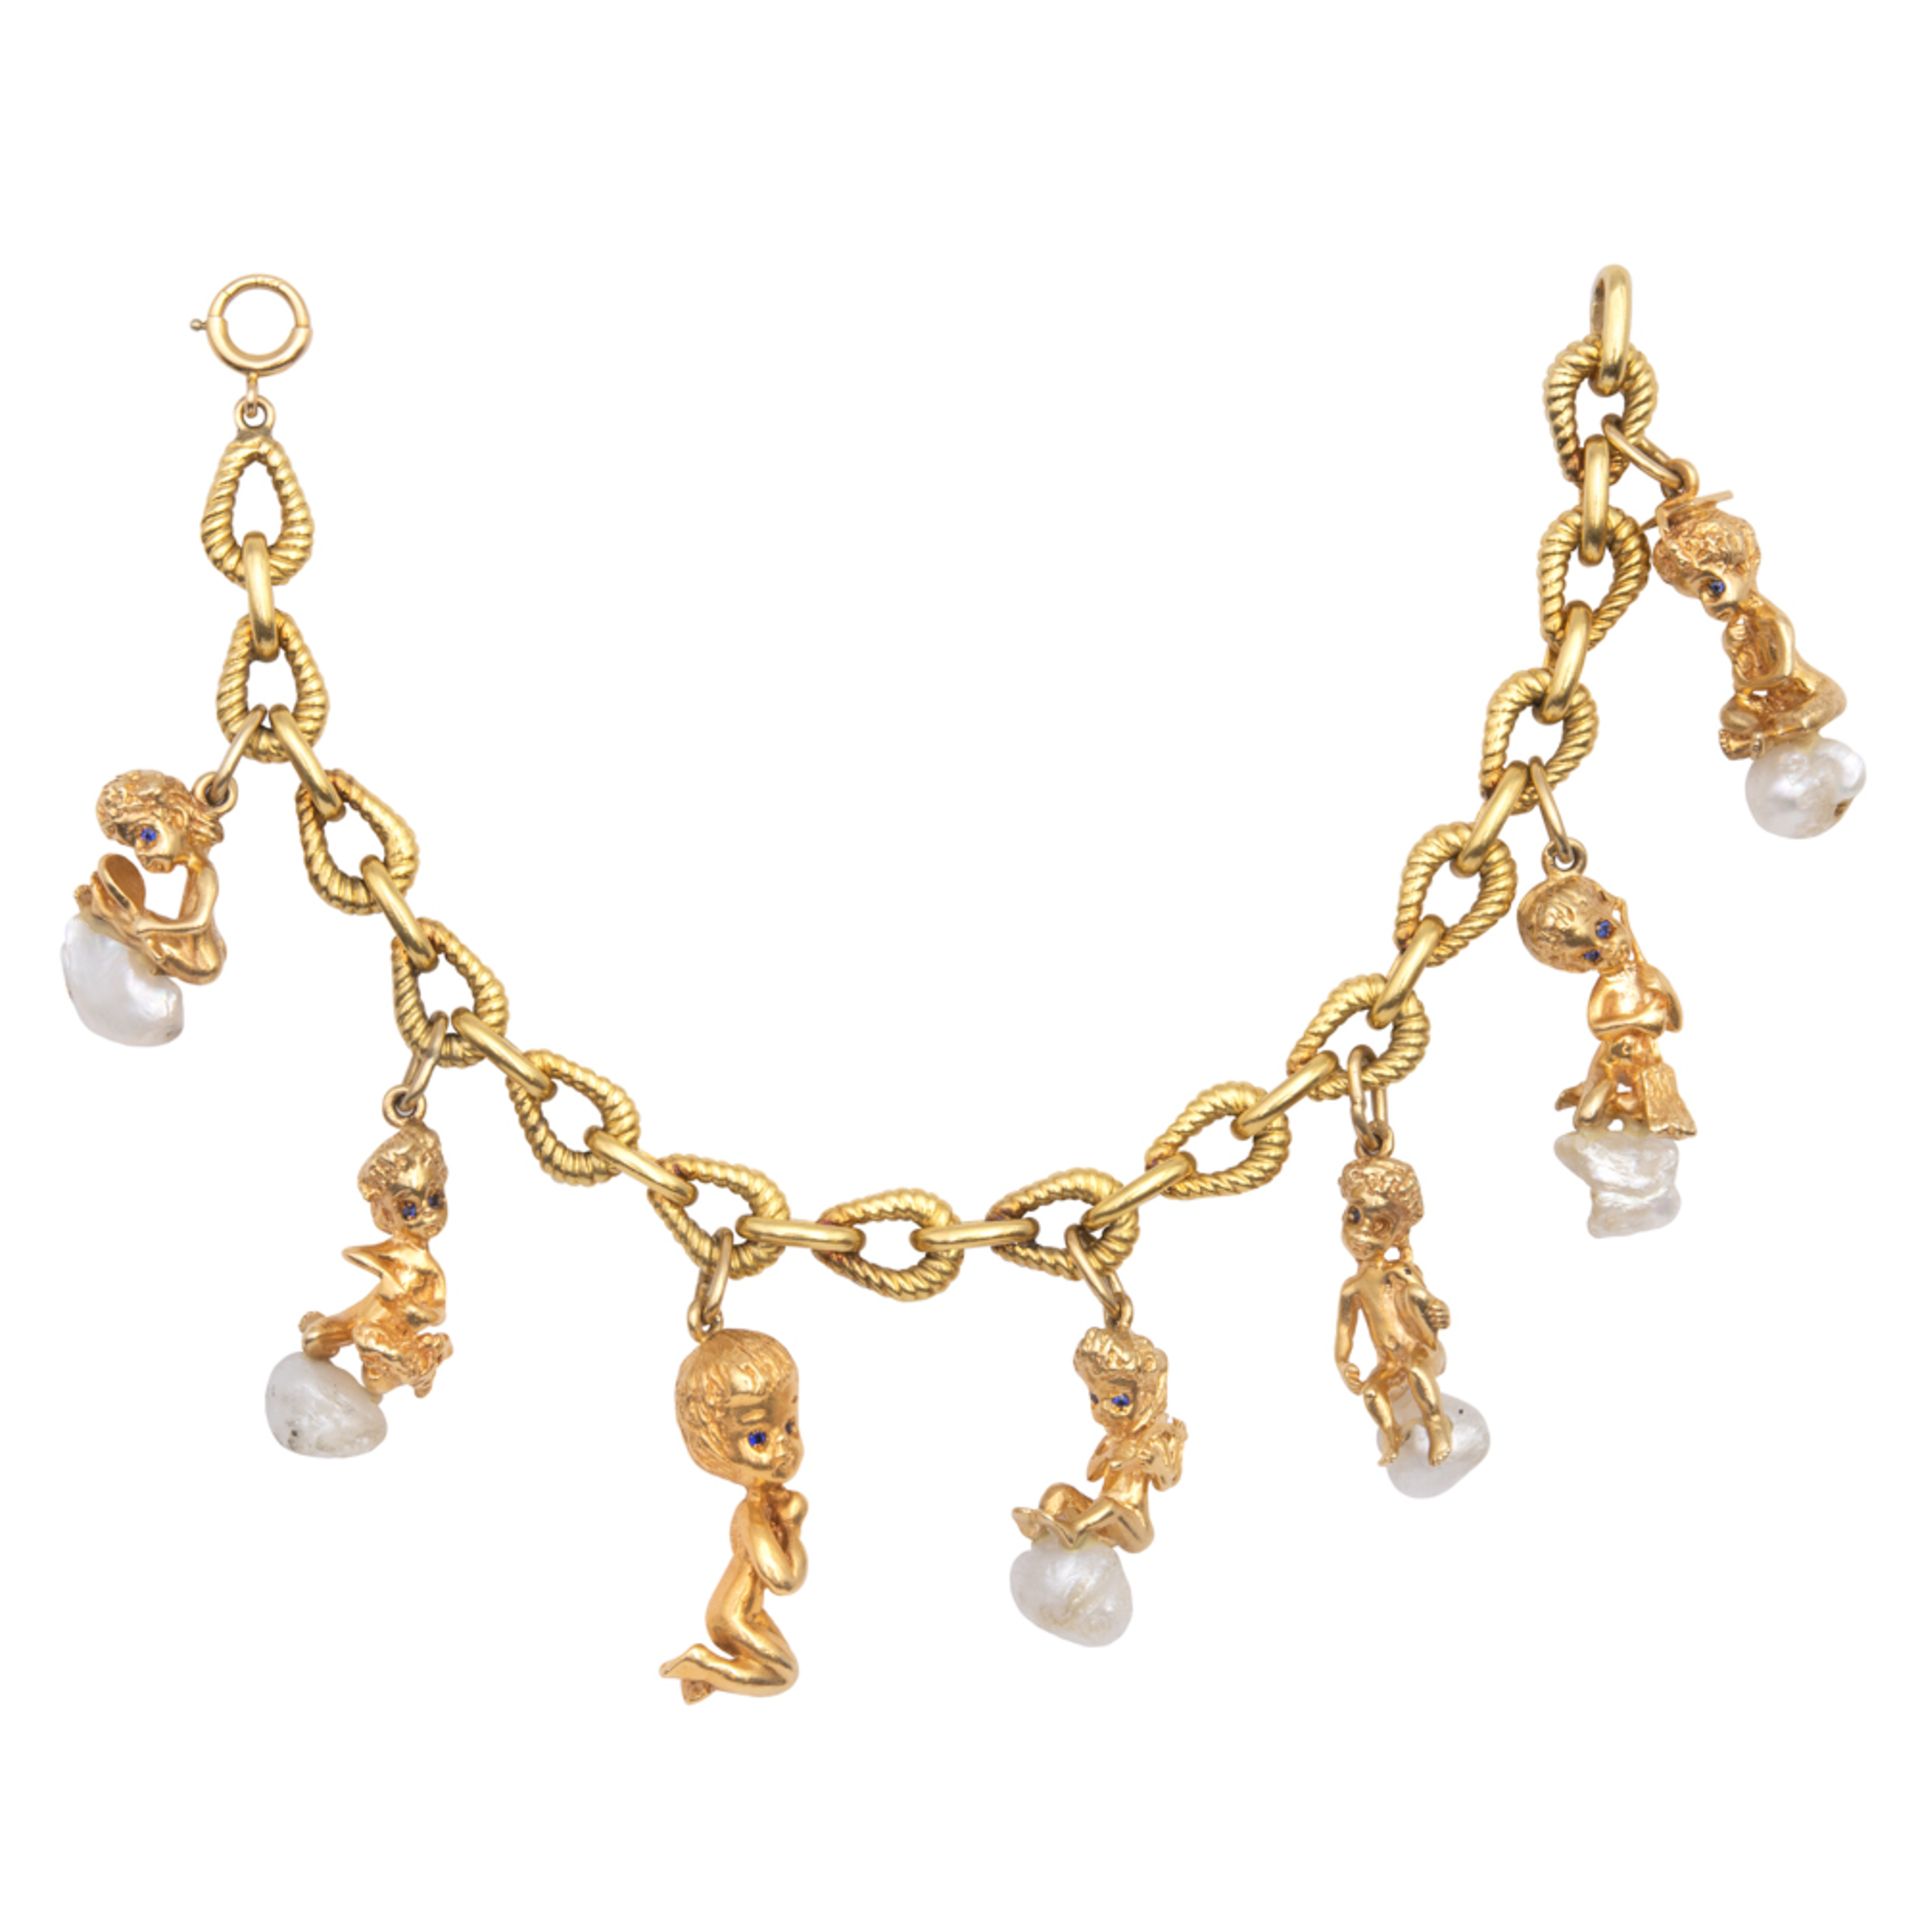 14kt yellow gold and Mississippi river pearls Charms bracelet